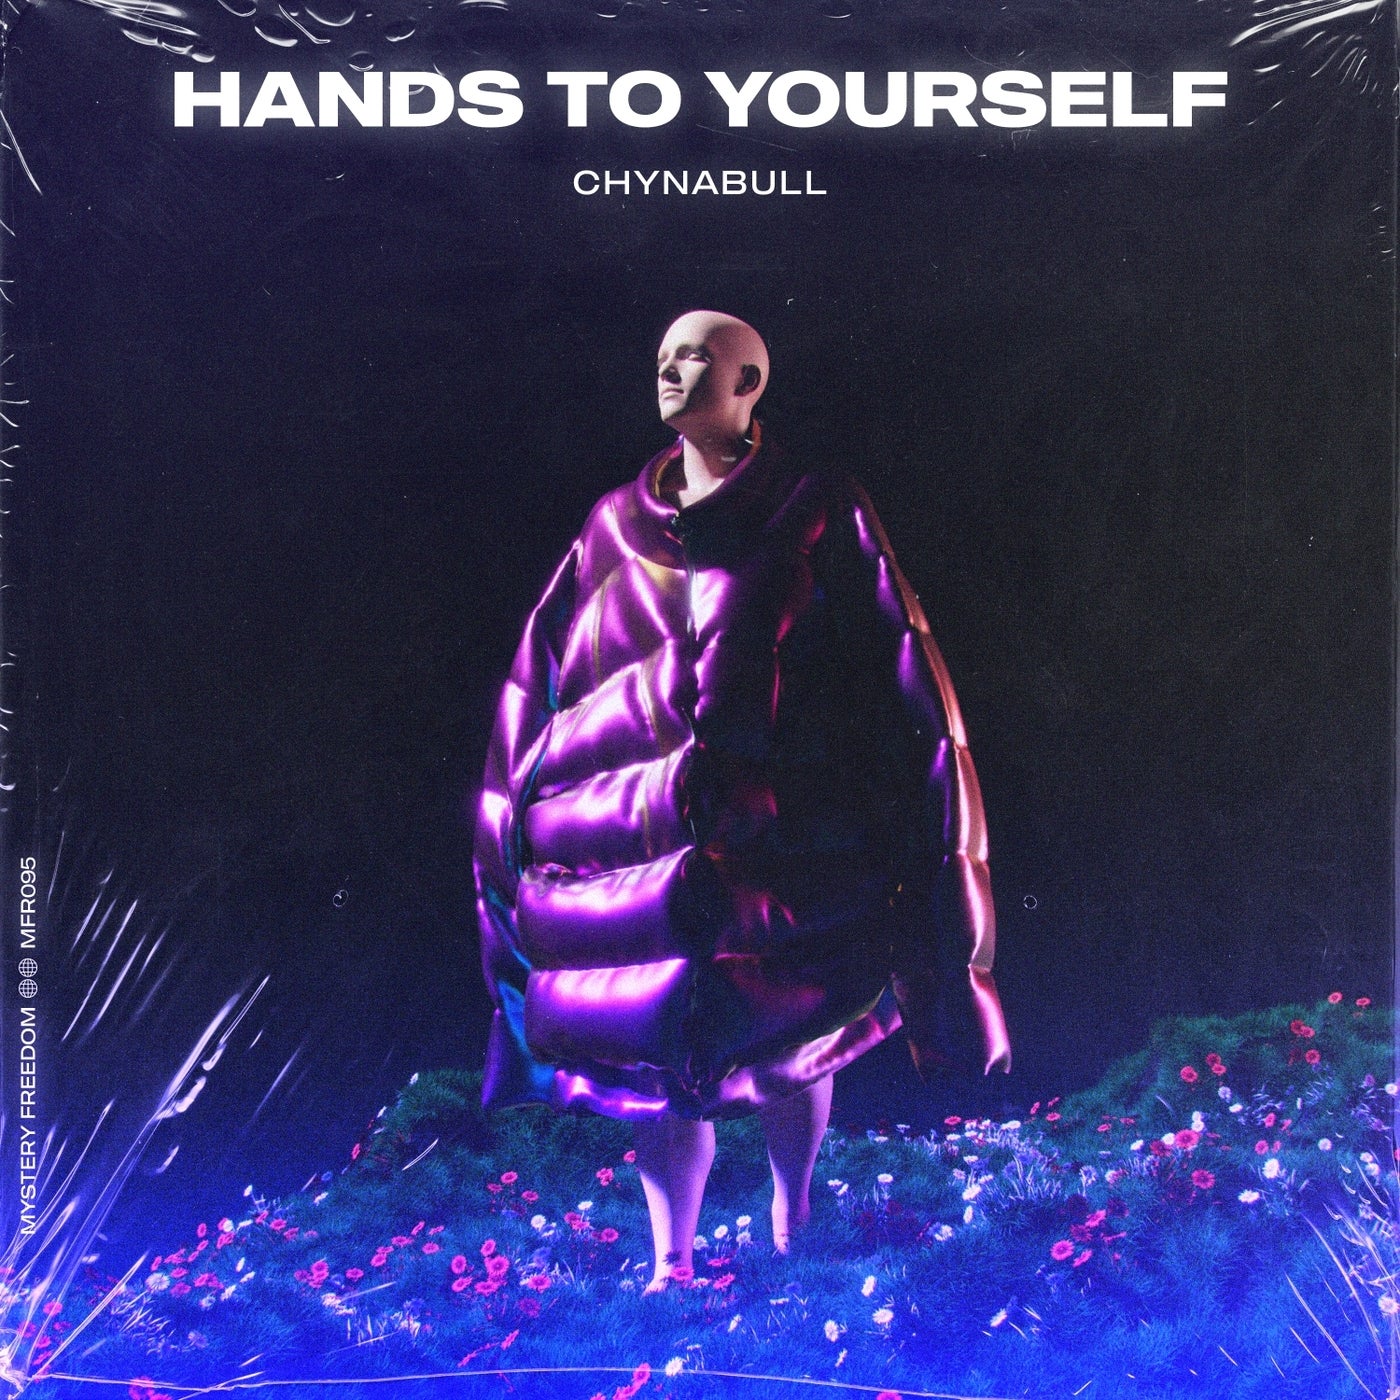 Hands to Yourself